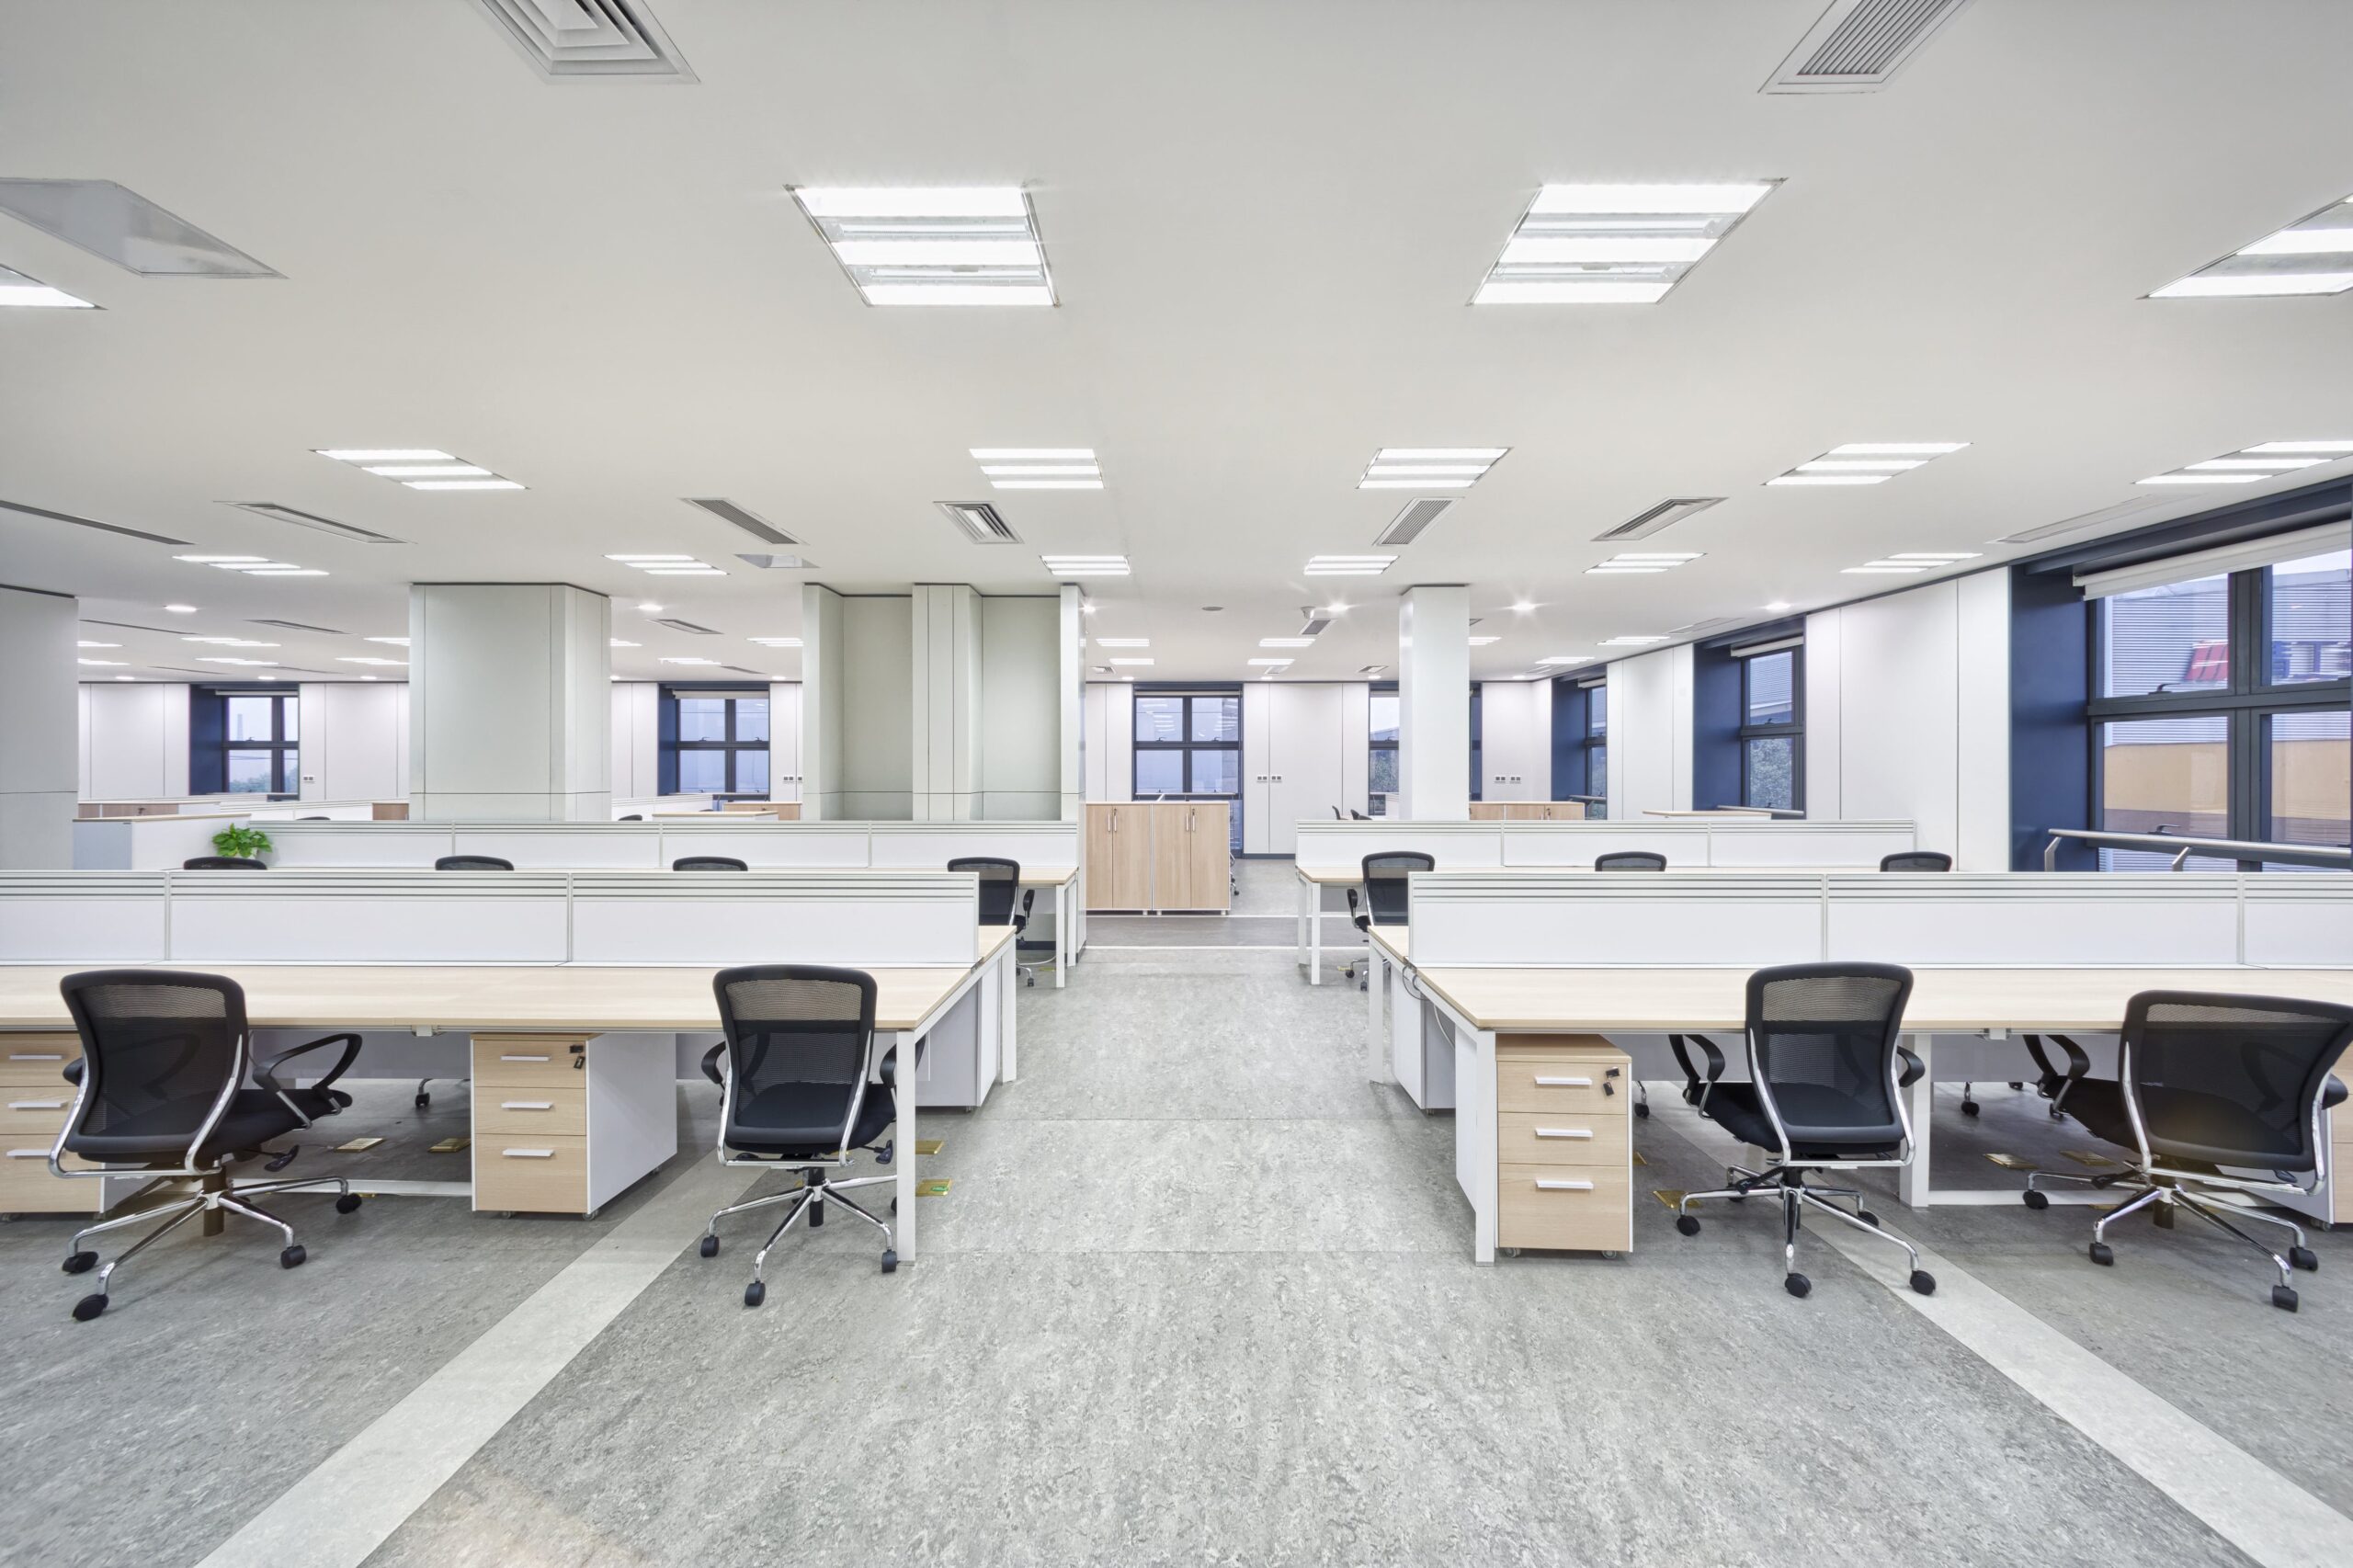 Why Should You Choose Modular Office Furniture For Your Small Office Space?